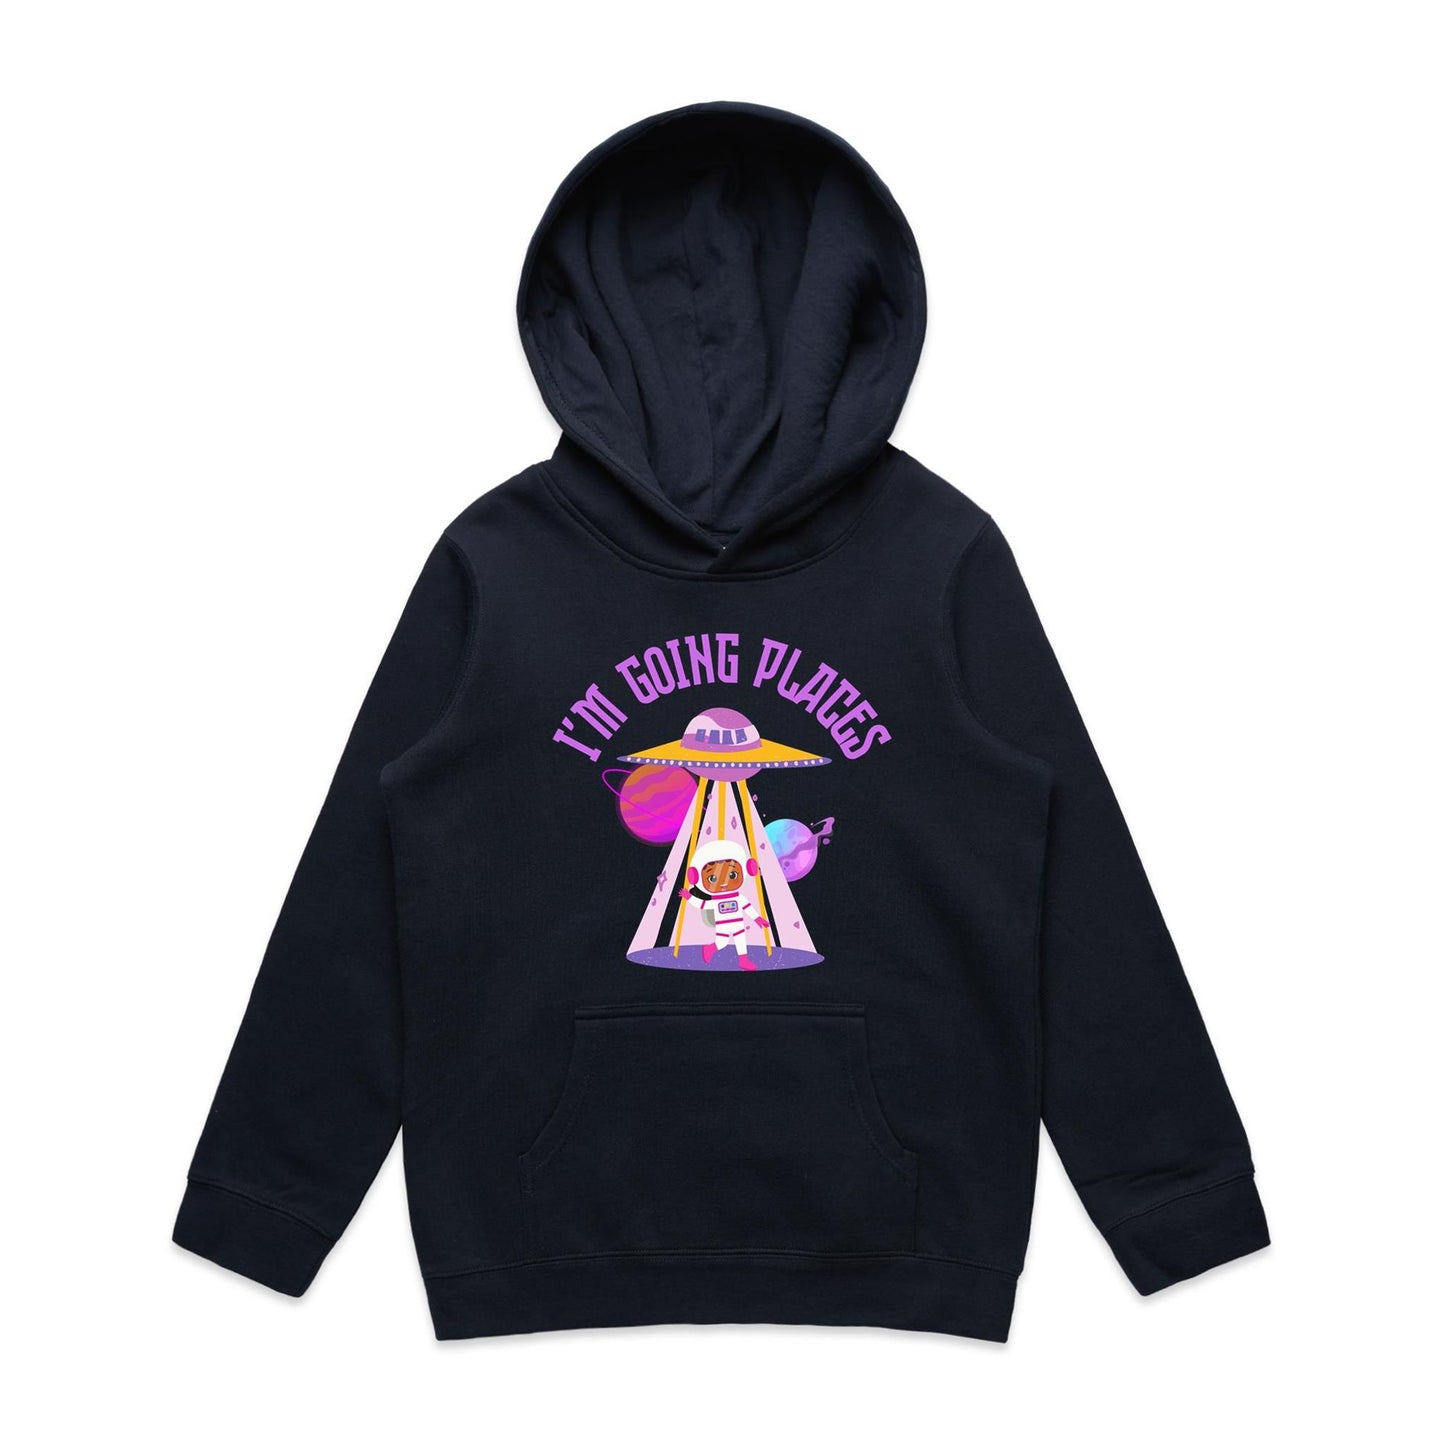 UFO, I'm Going Places - Youth Supply Hood Navy Kids Hoodie Sci Fi